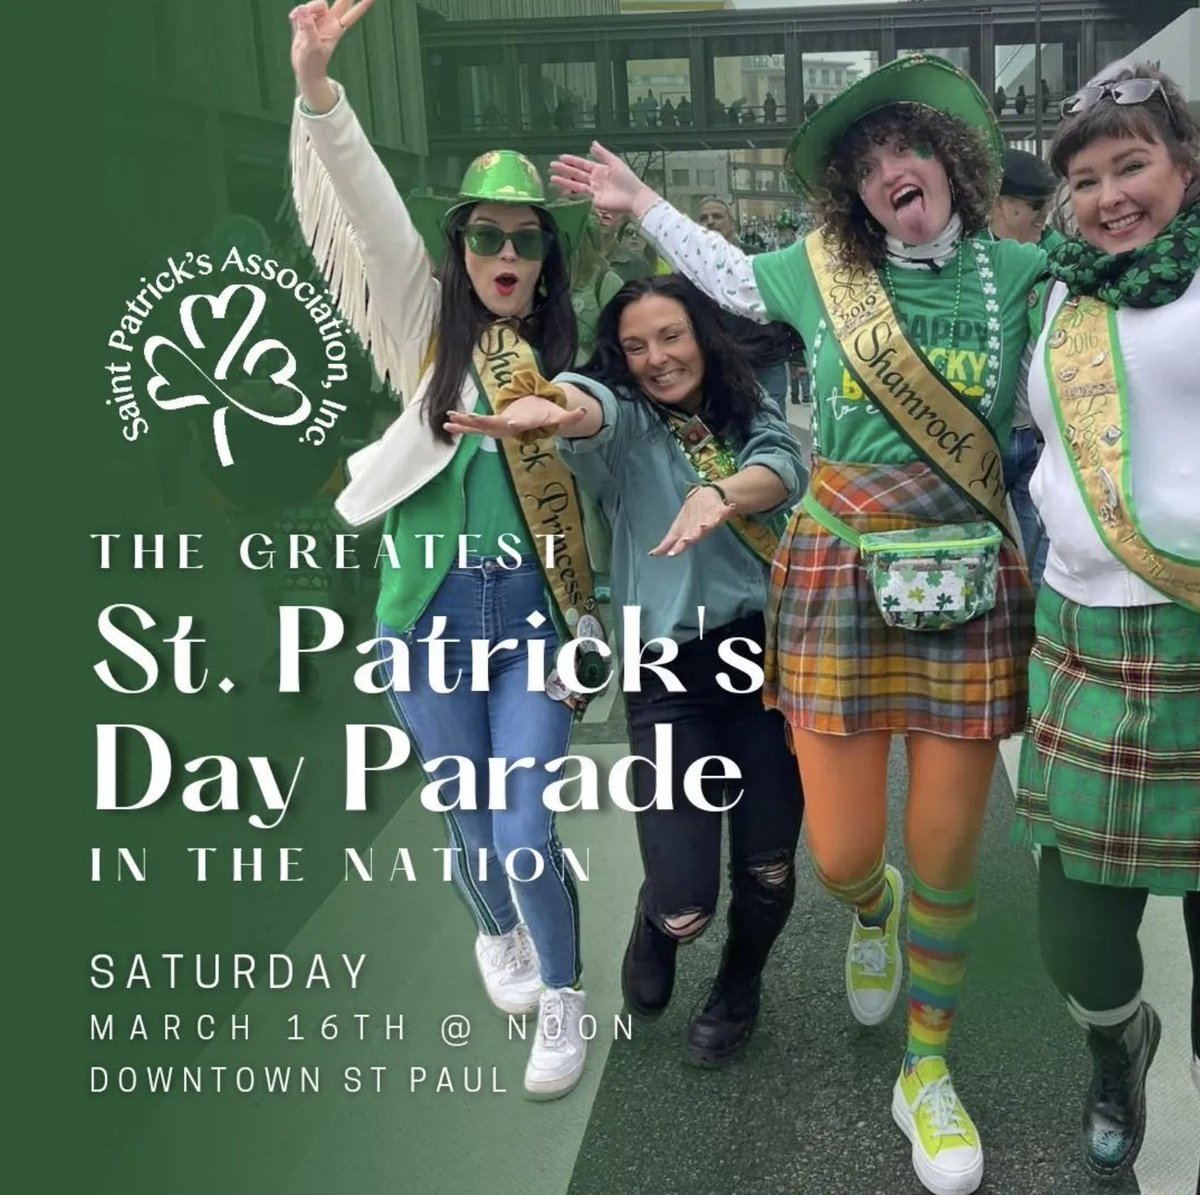 Excited to see all the green near our Mears Park this St. Paddy's weekend! 🍀 The annual Saint Patrick's Day Parade is this Saturday, March 16 from noon-1pm. Graphic by the St. Patrick's Association 💚🍻